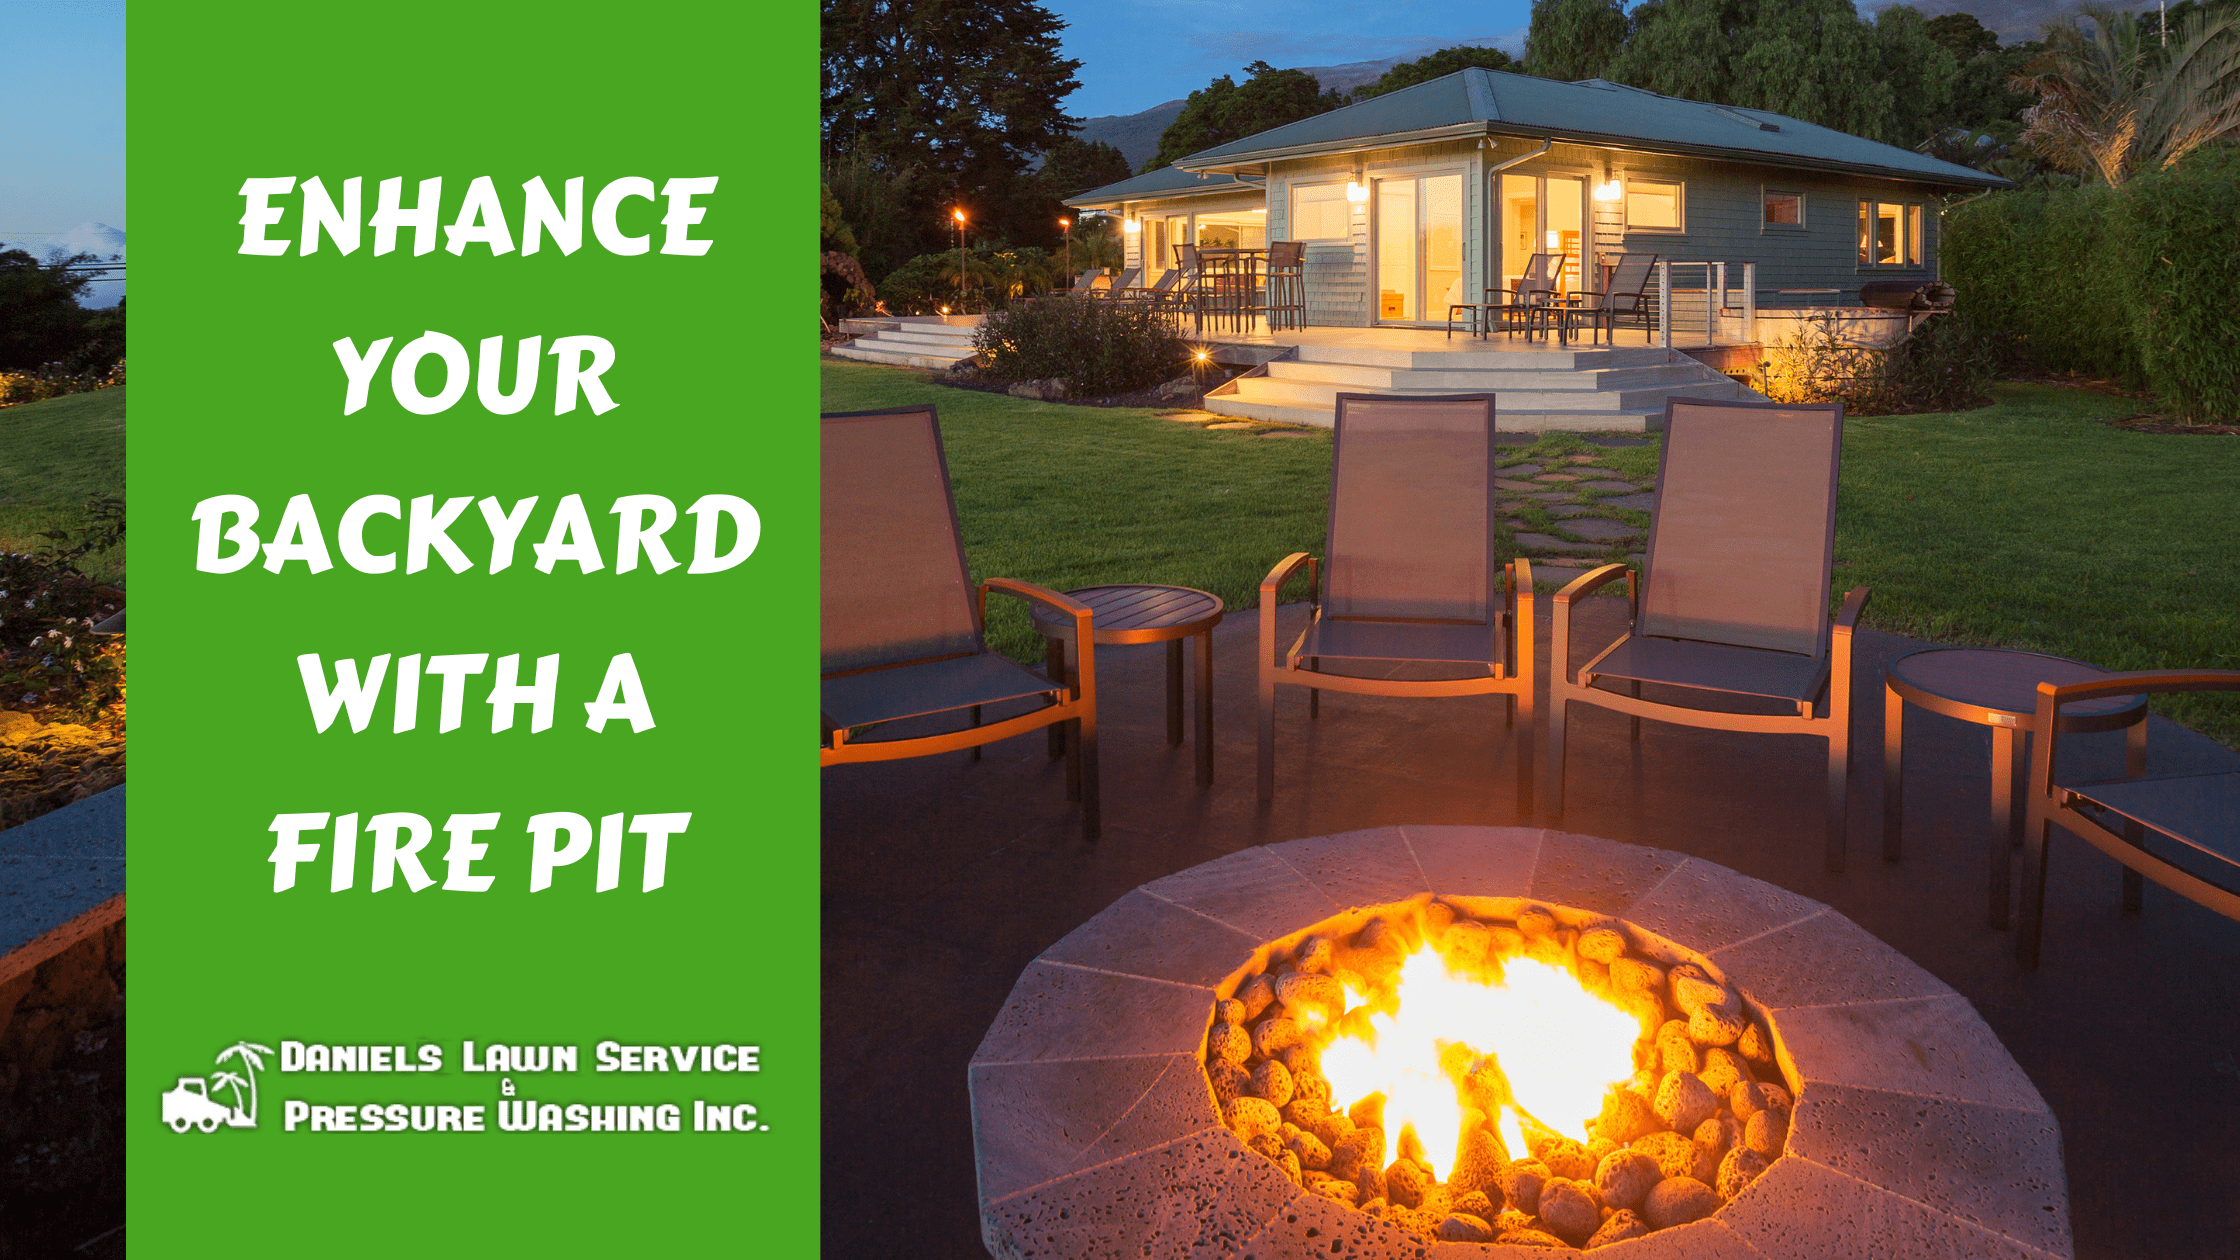 Enhance Your Backyard with a Fire Pit - Paperblog